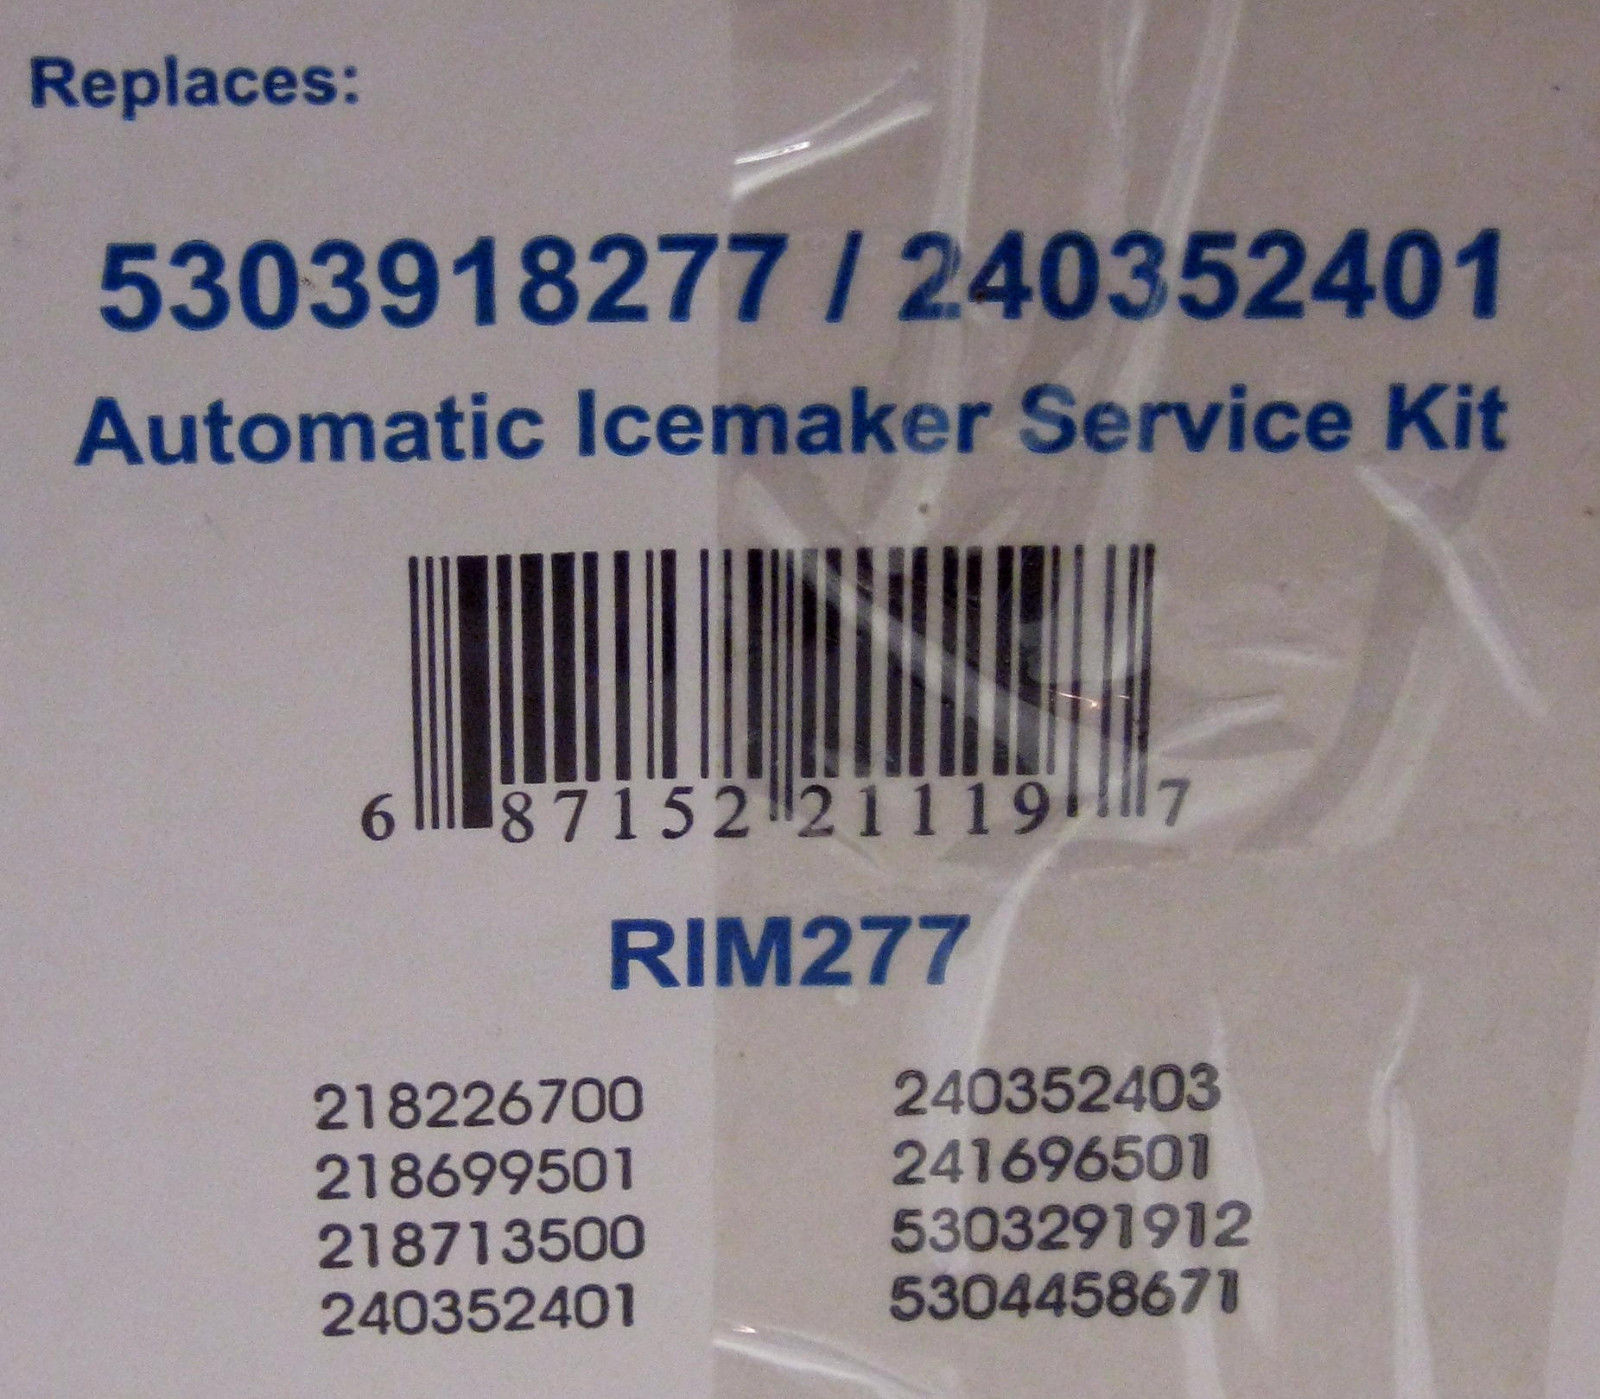 SUPCO RIM277 11-1/4 in. x 4-1/2 in. Replacement Ice Maker - image 2 of 2